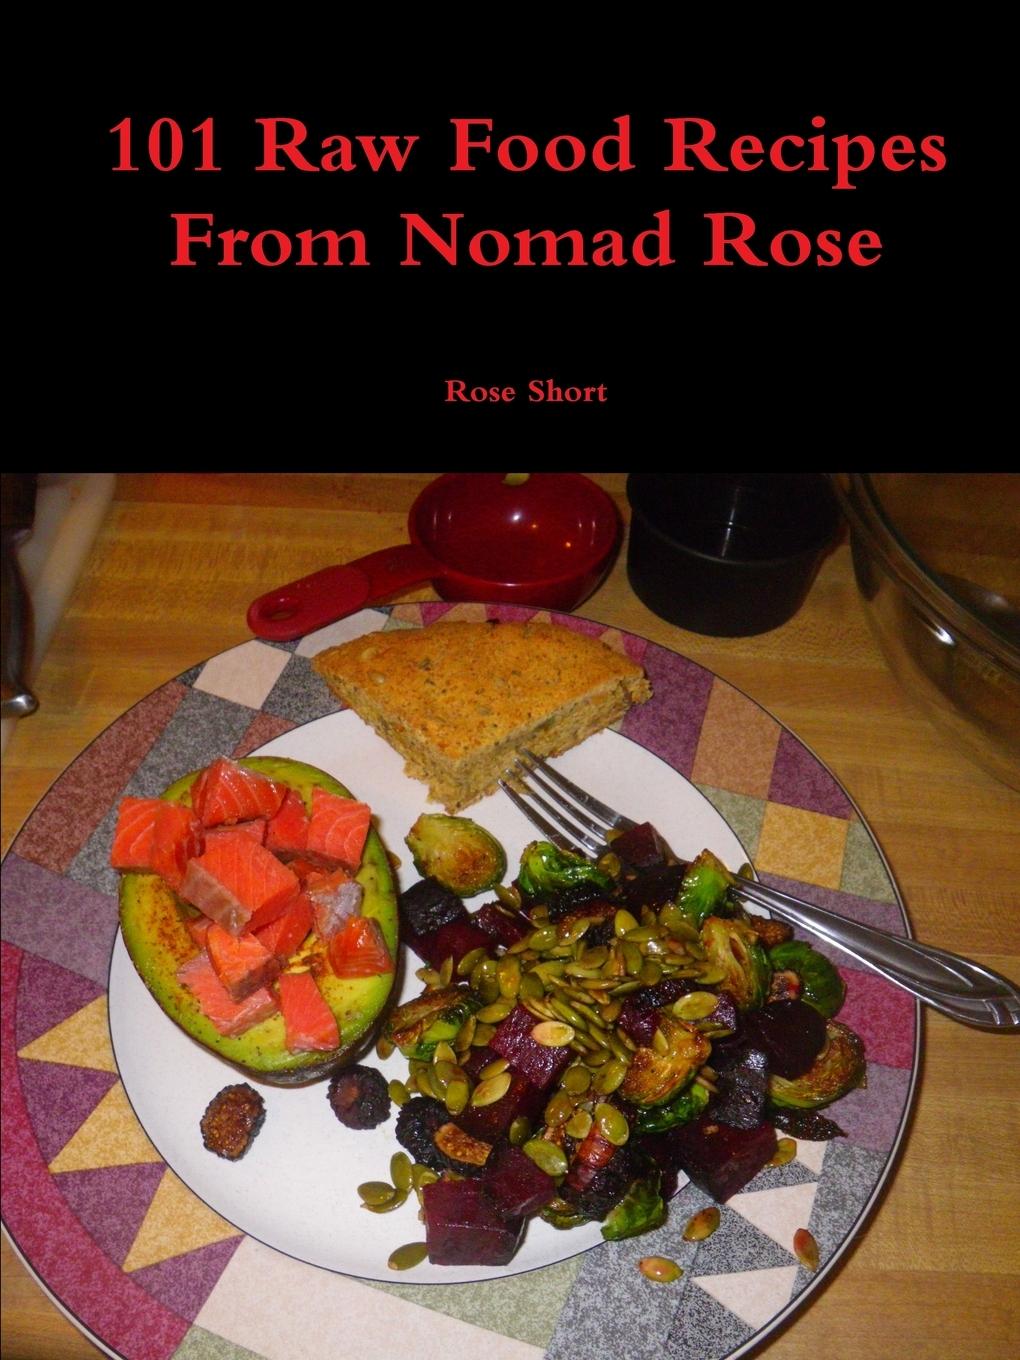 101 Raw Food Recipes From Nomad Rose - Short, Rose